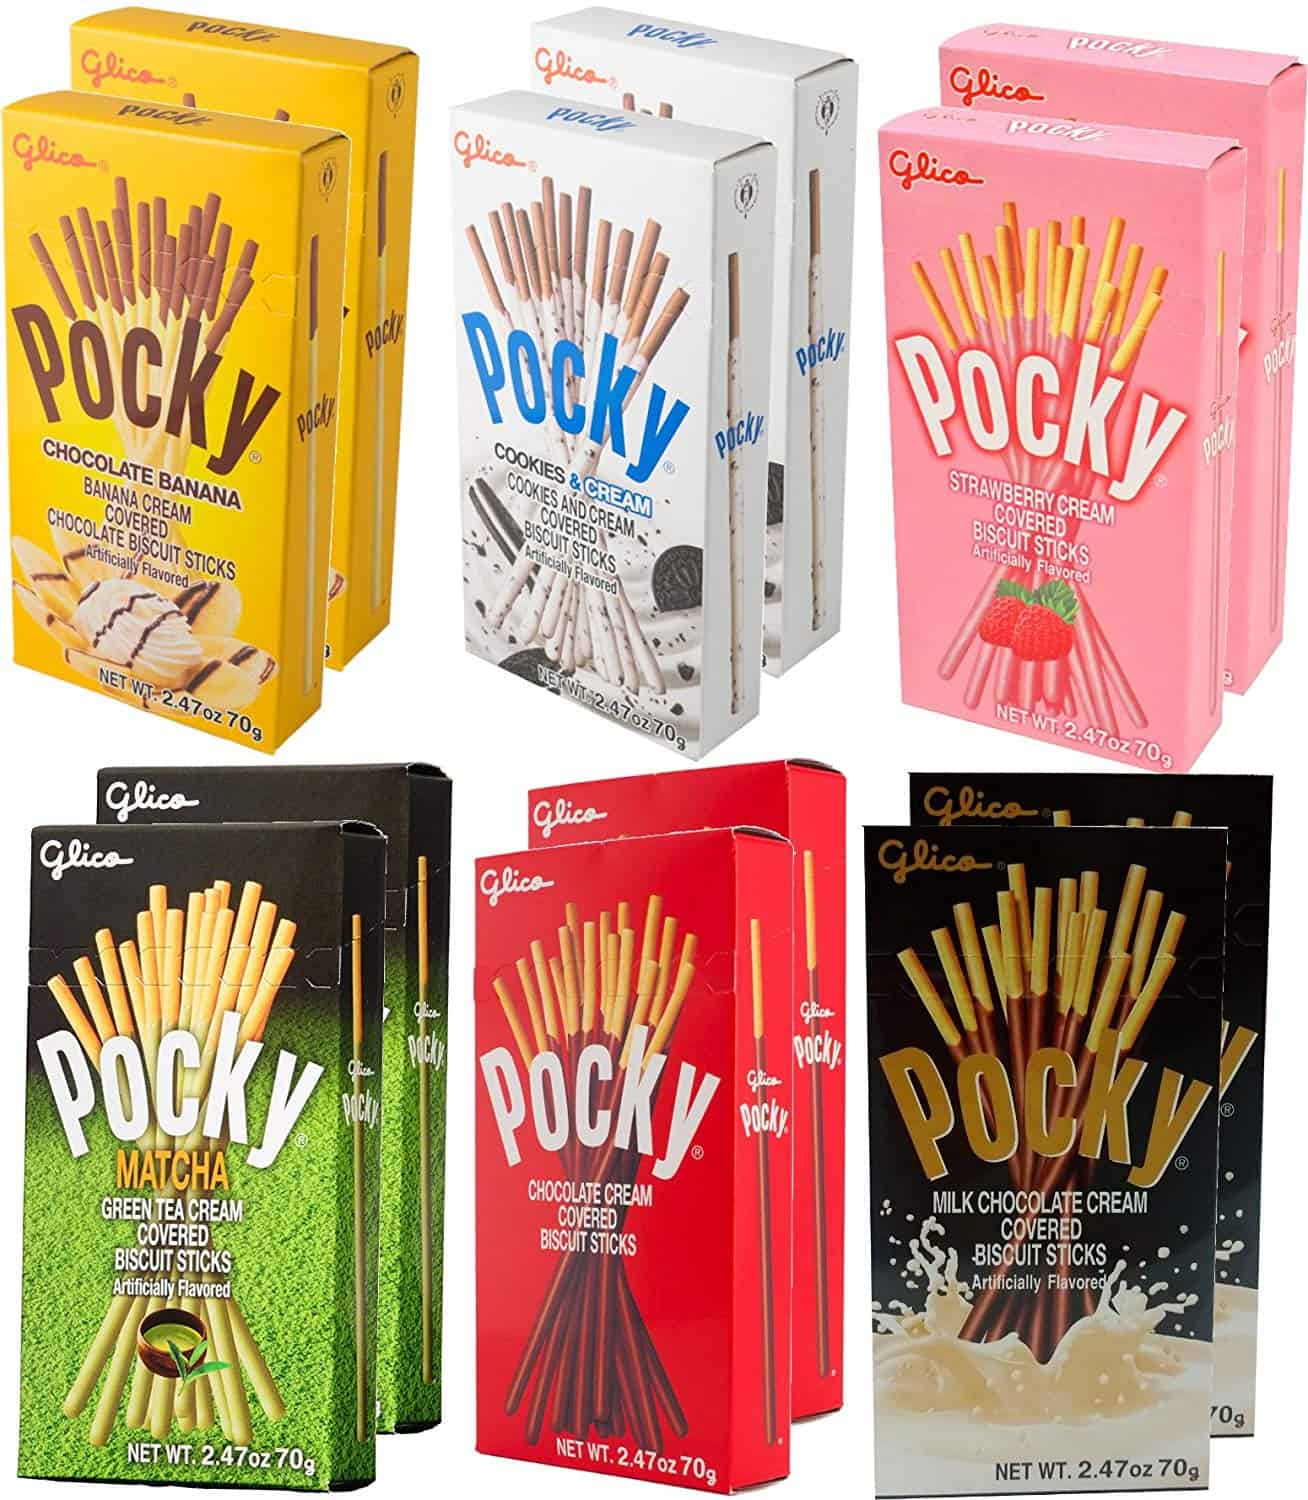 Different flavors of pocky